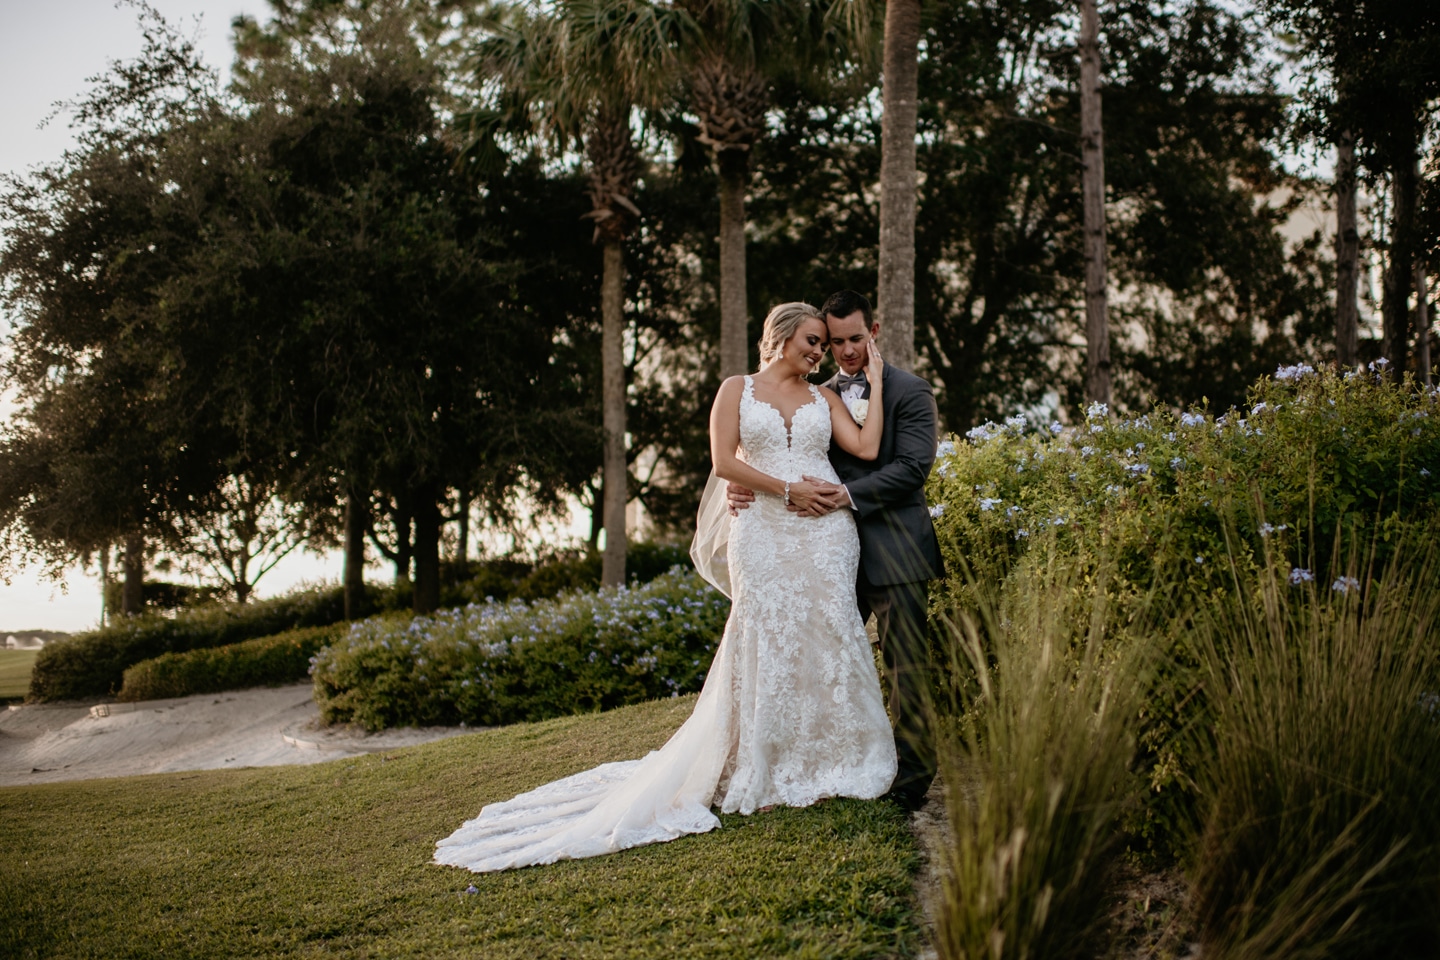 Omni Orlando Resort at ChampionsGate - bride and groom on lush golf course grounds